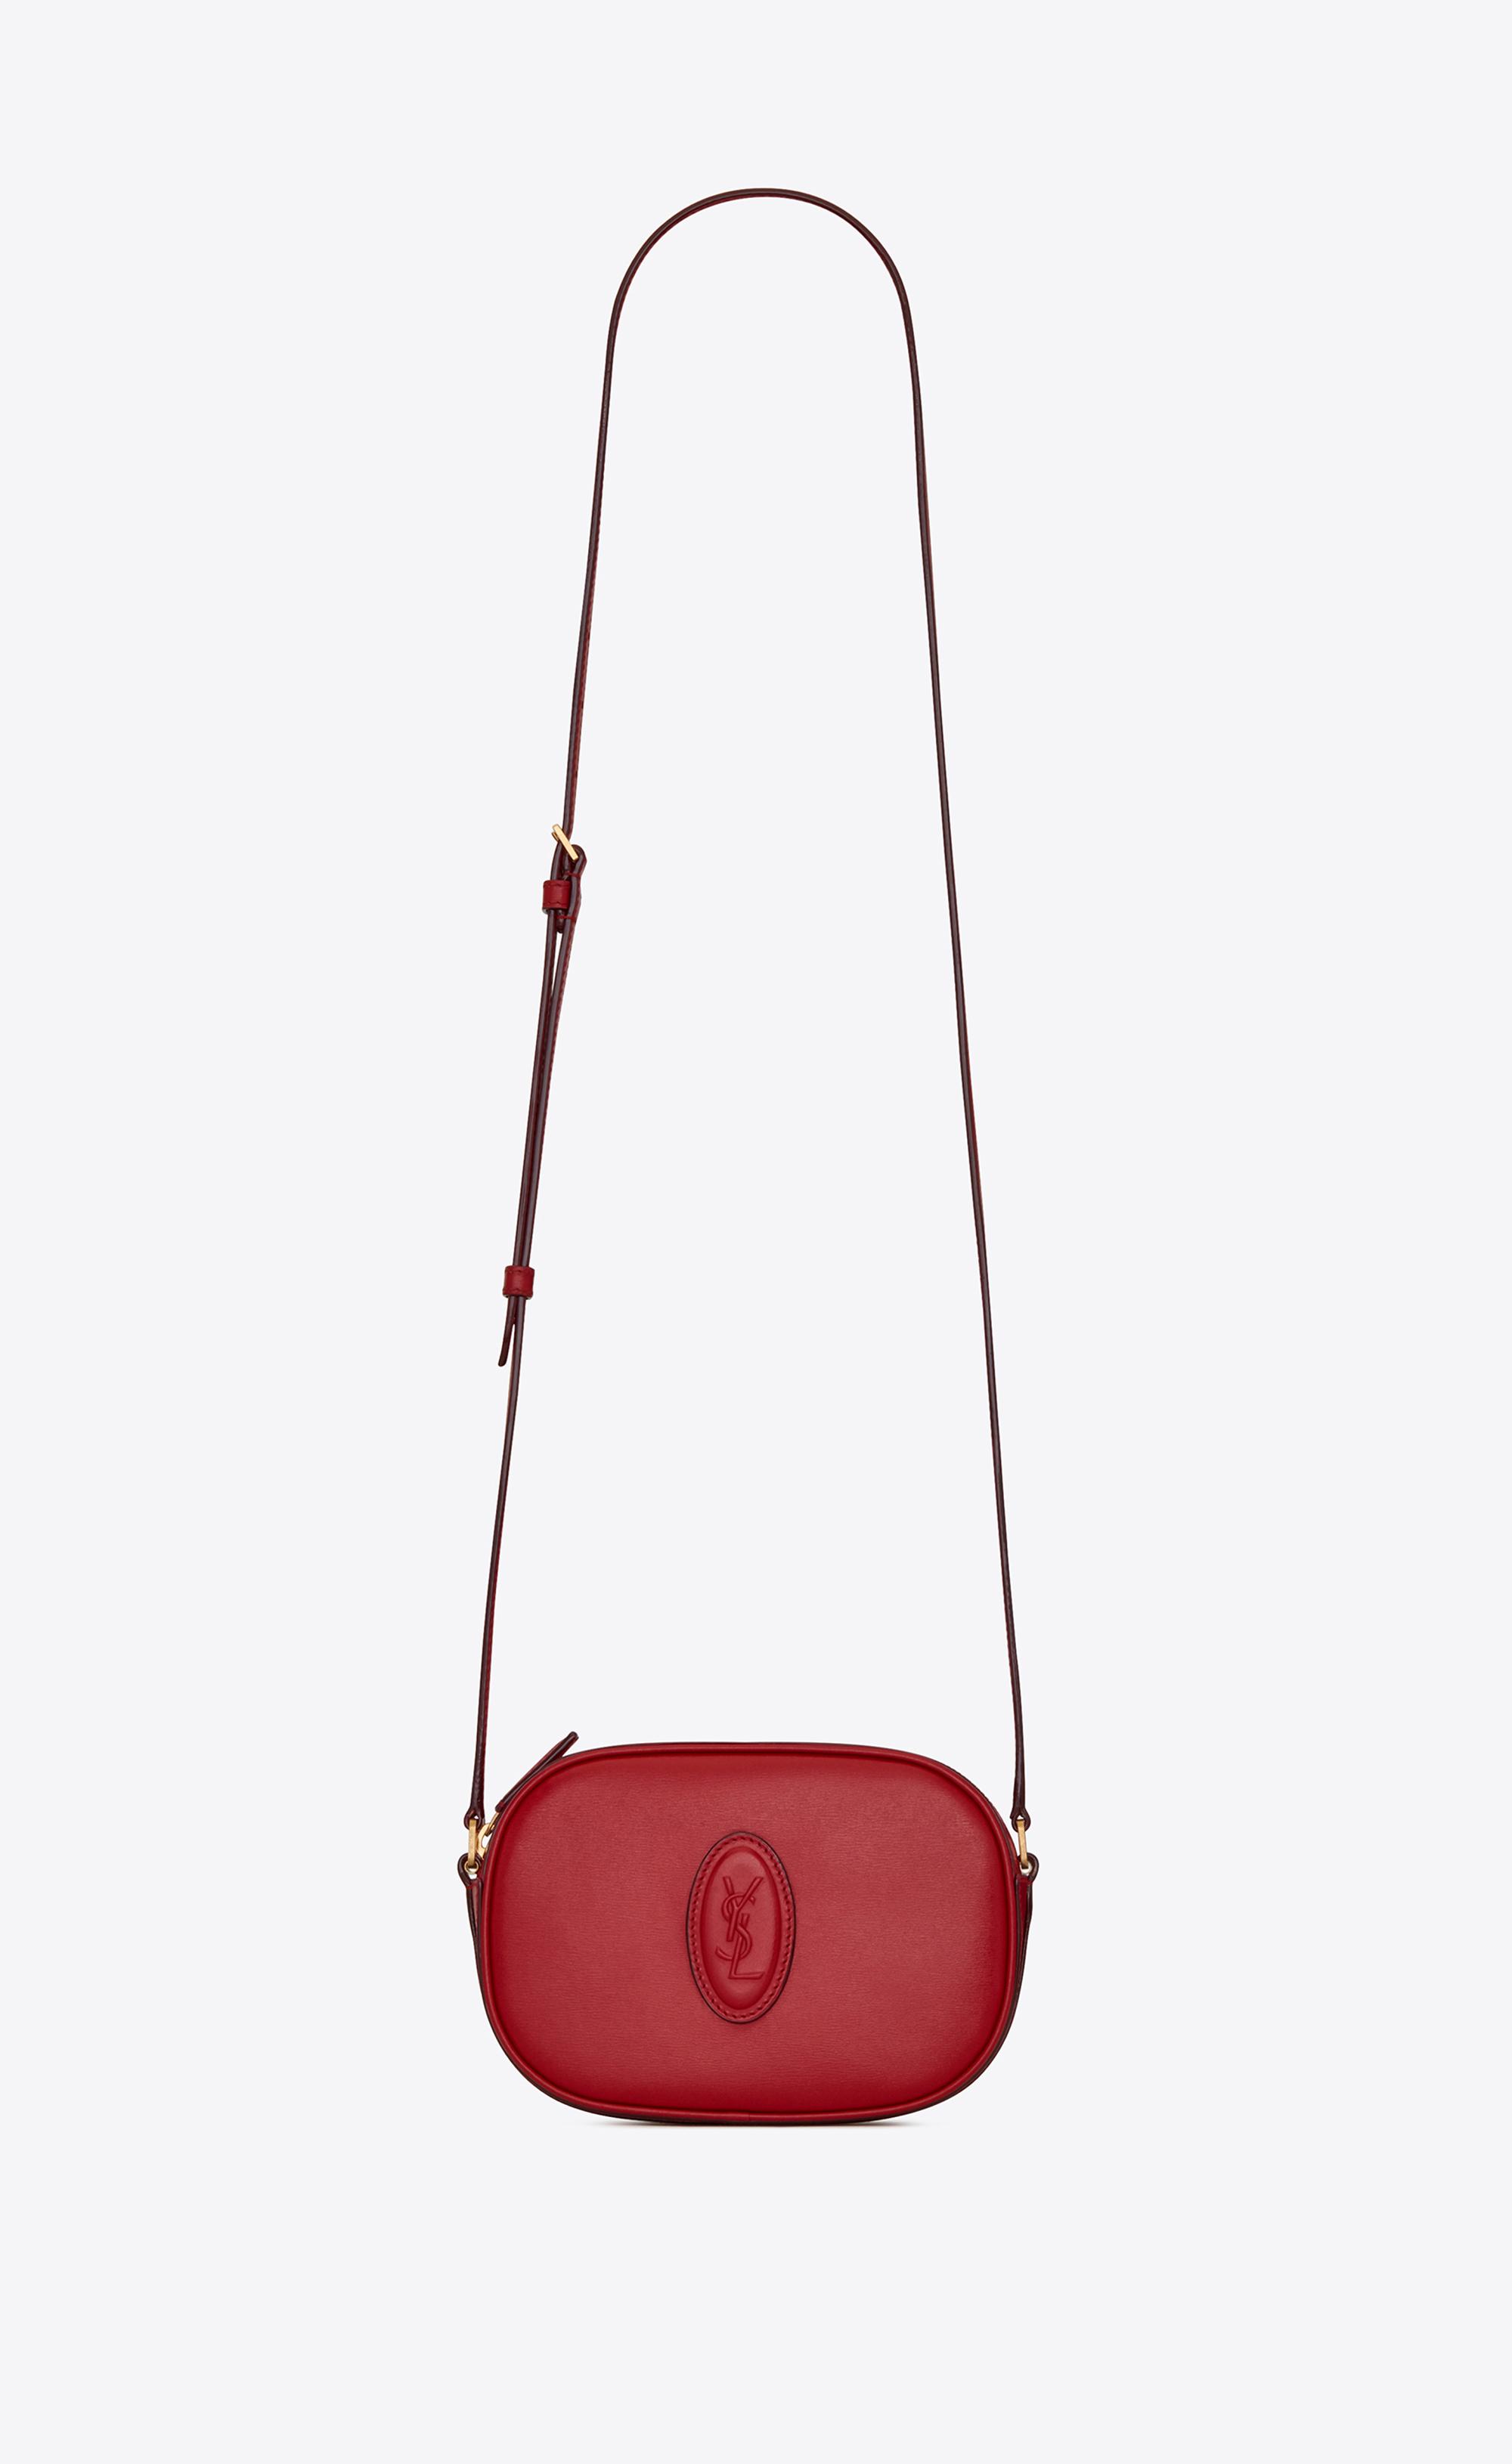 LE MONOGRAMME CAMERA BAG IN CASSANDRE CANVAS AND SMOOTH LEATHER